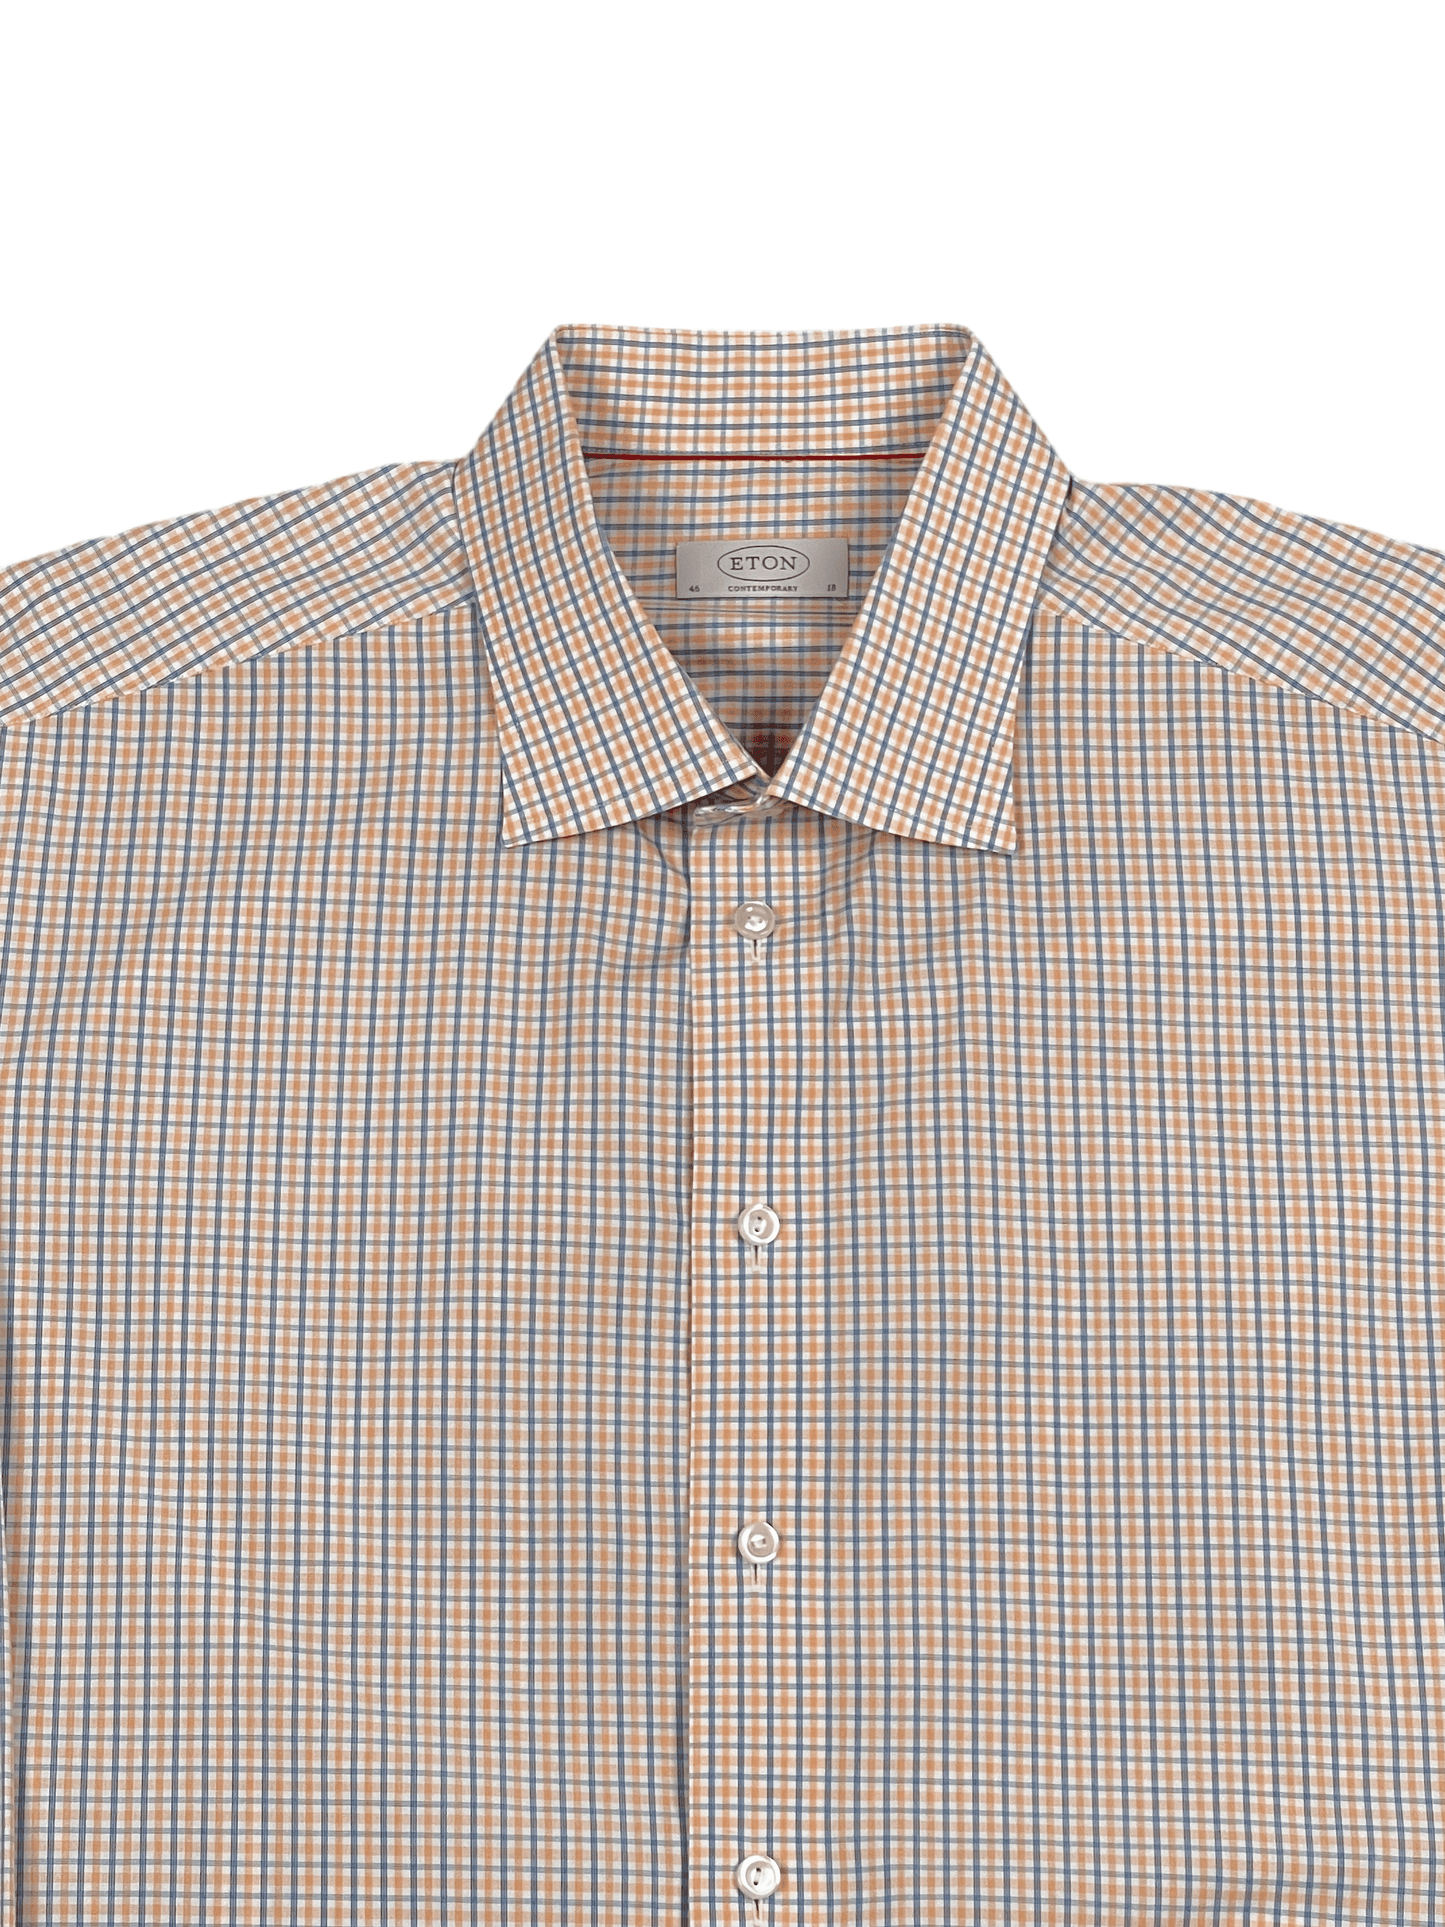 Eton Orange and Blue Micro Check Dress Shirt  18 / 46 - Genuine Design Luxury Consignment for Men. New & Pre-Owned Clothing, Shoes, & Accessories. Calgary, Canada